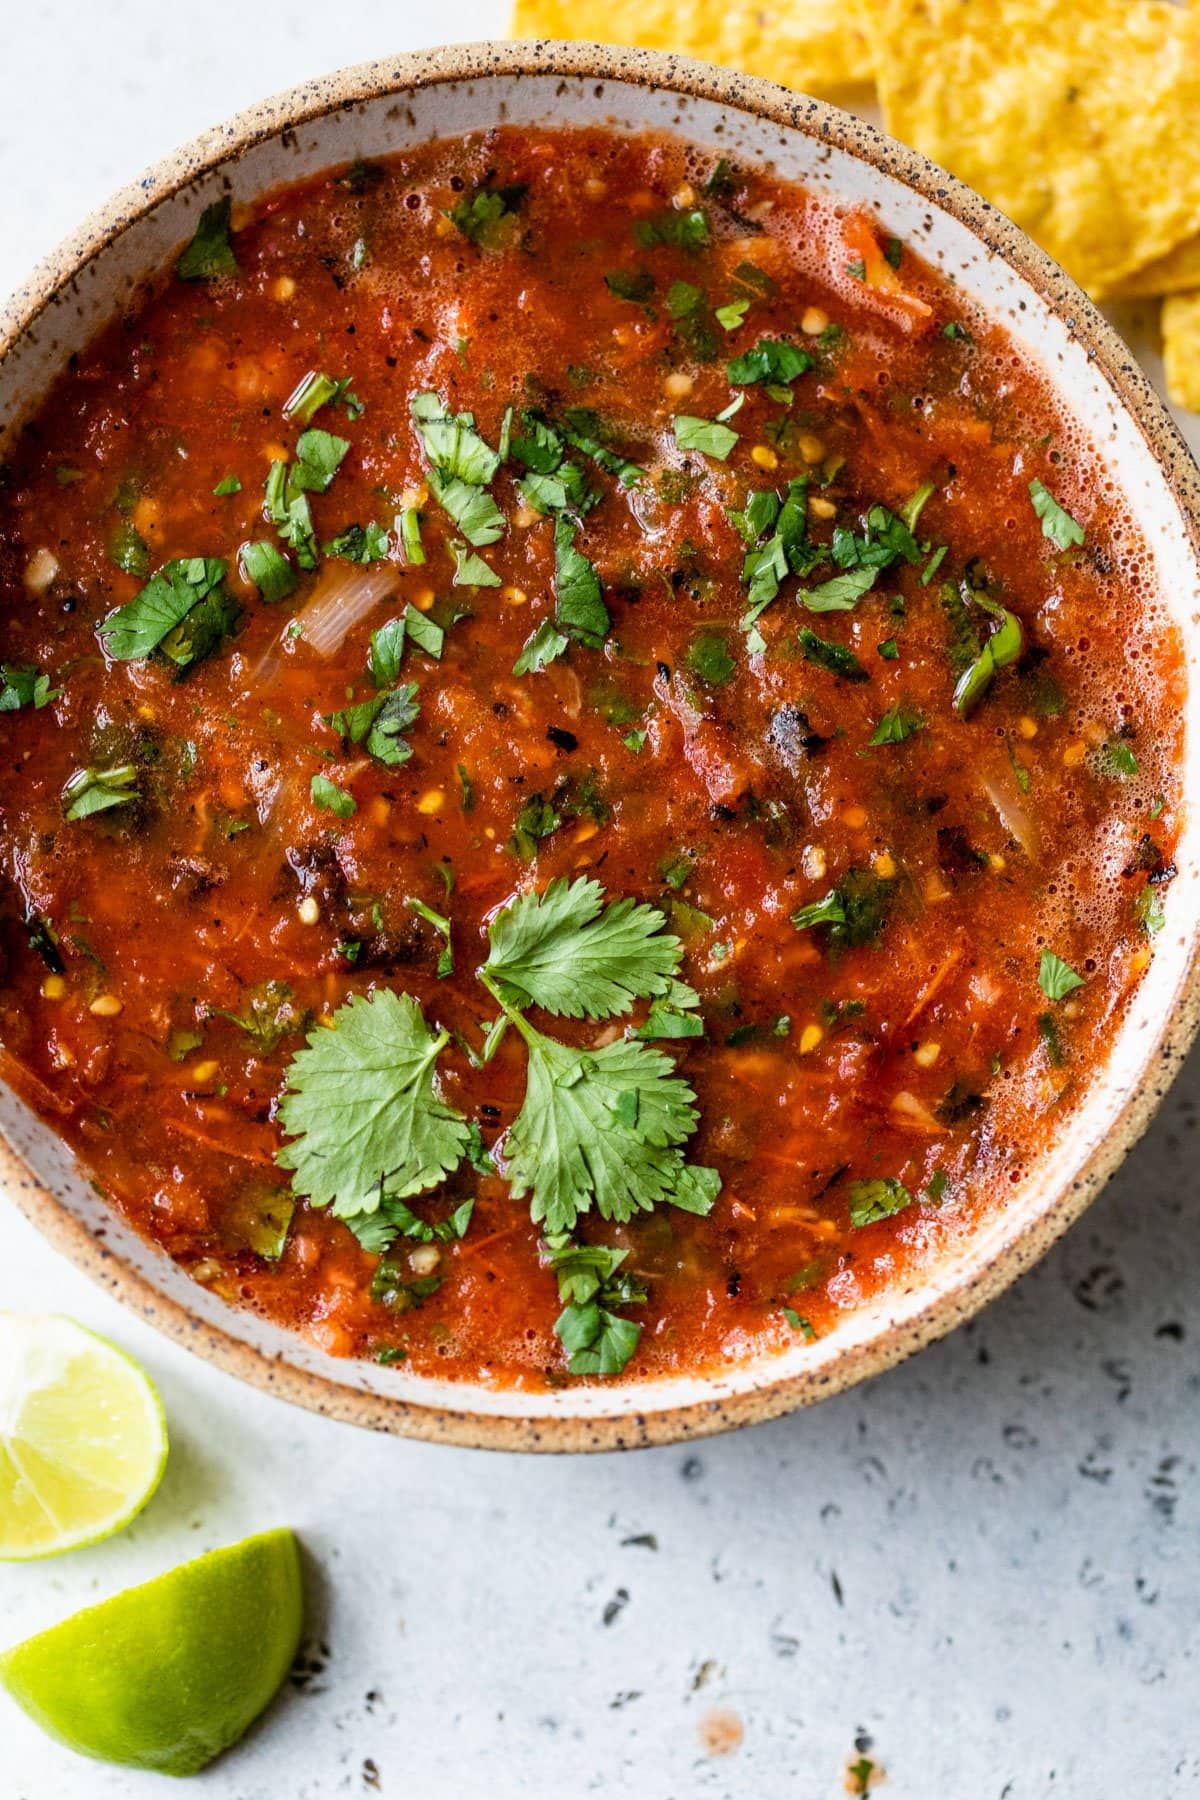 The Ultimate Salsa Roja: Charred for Maximum Flavor